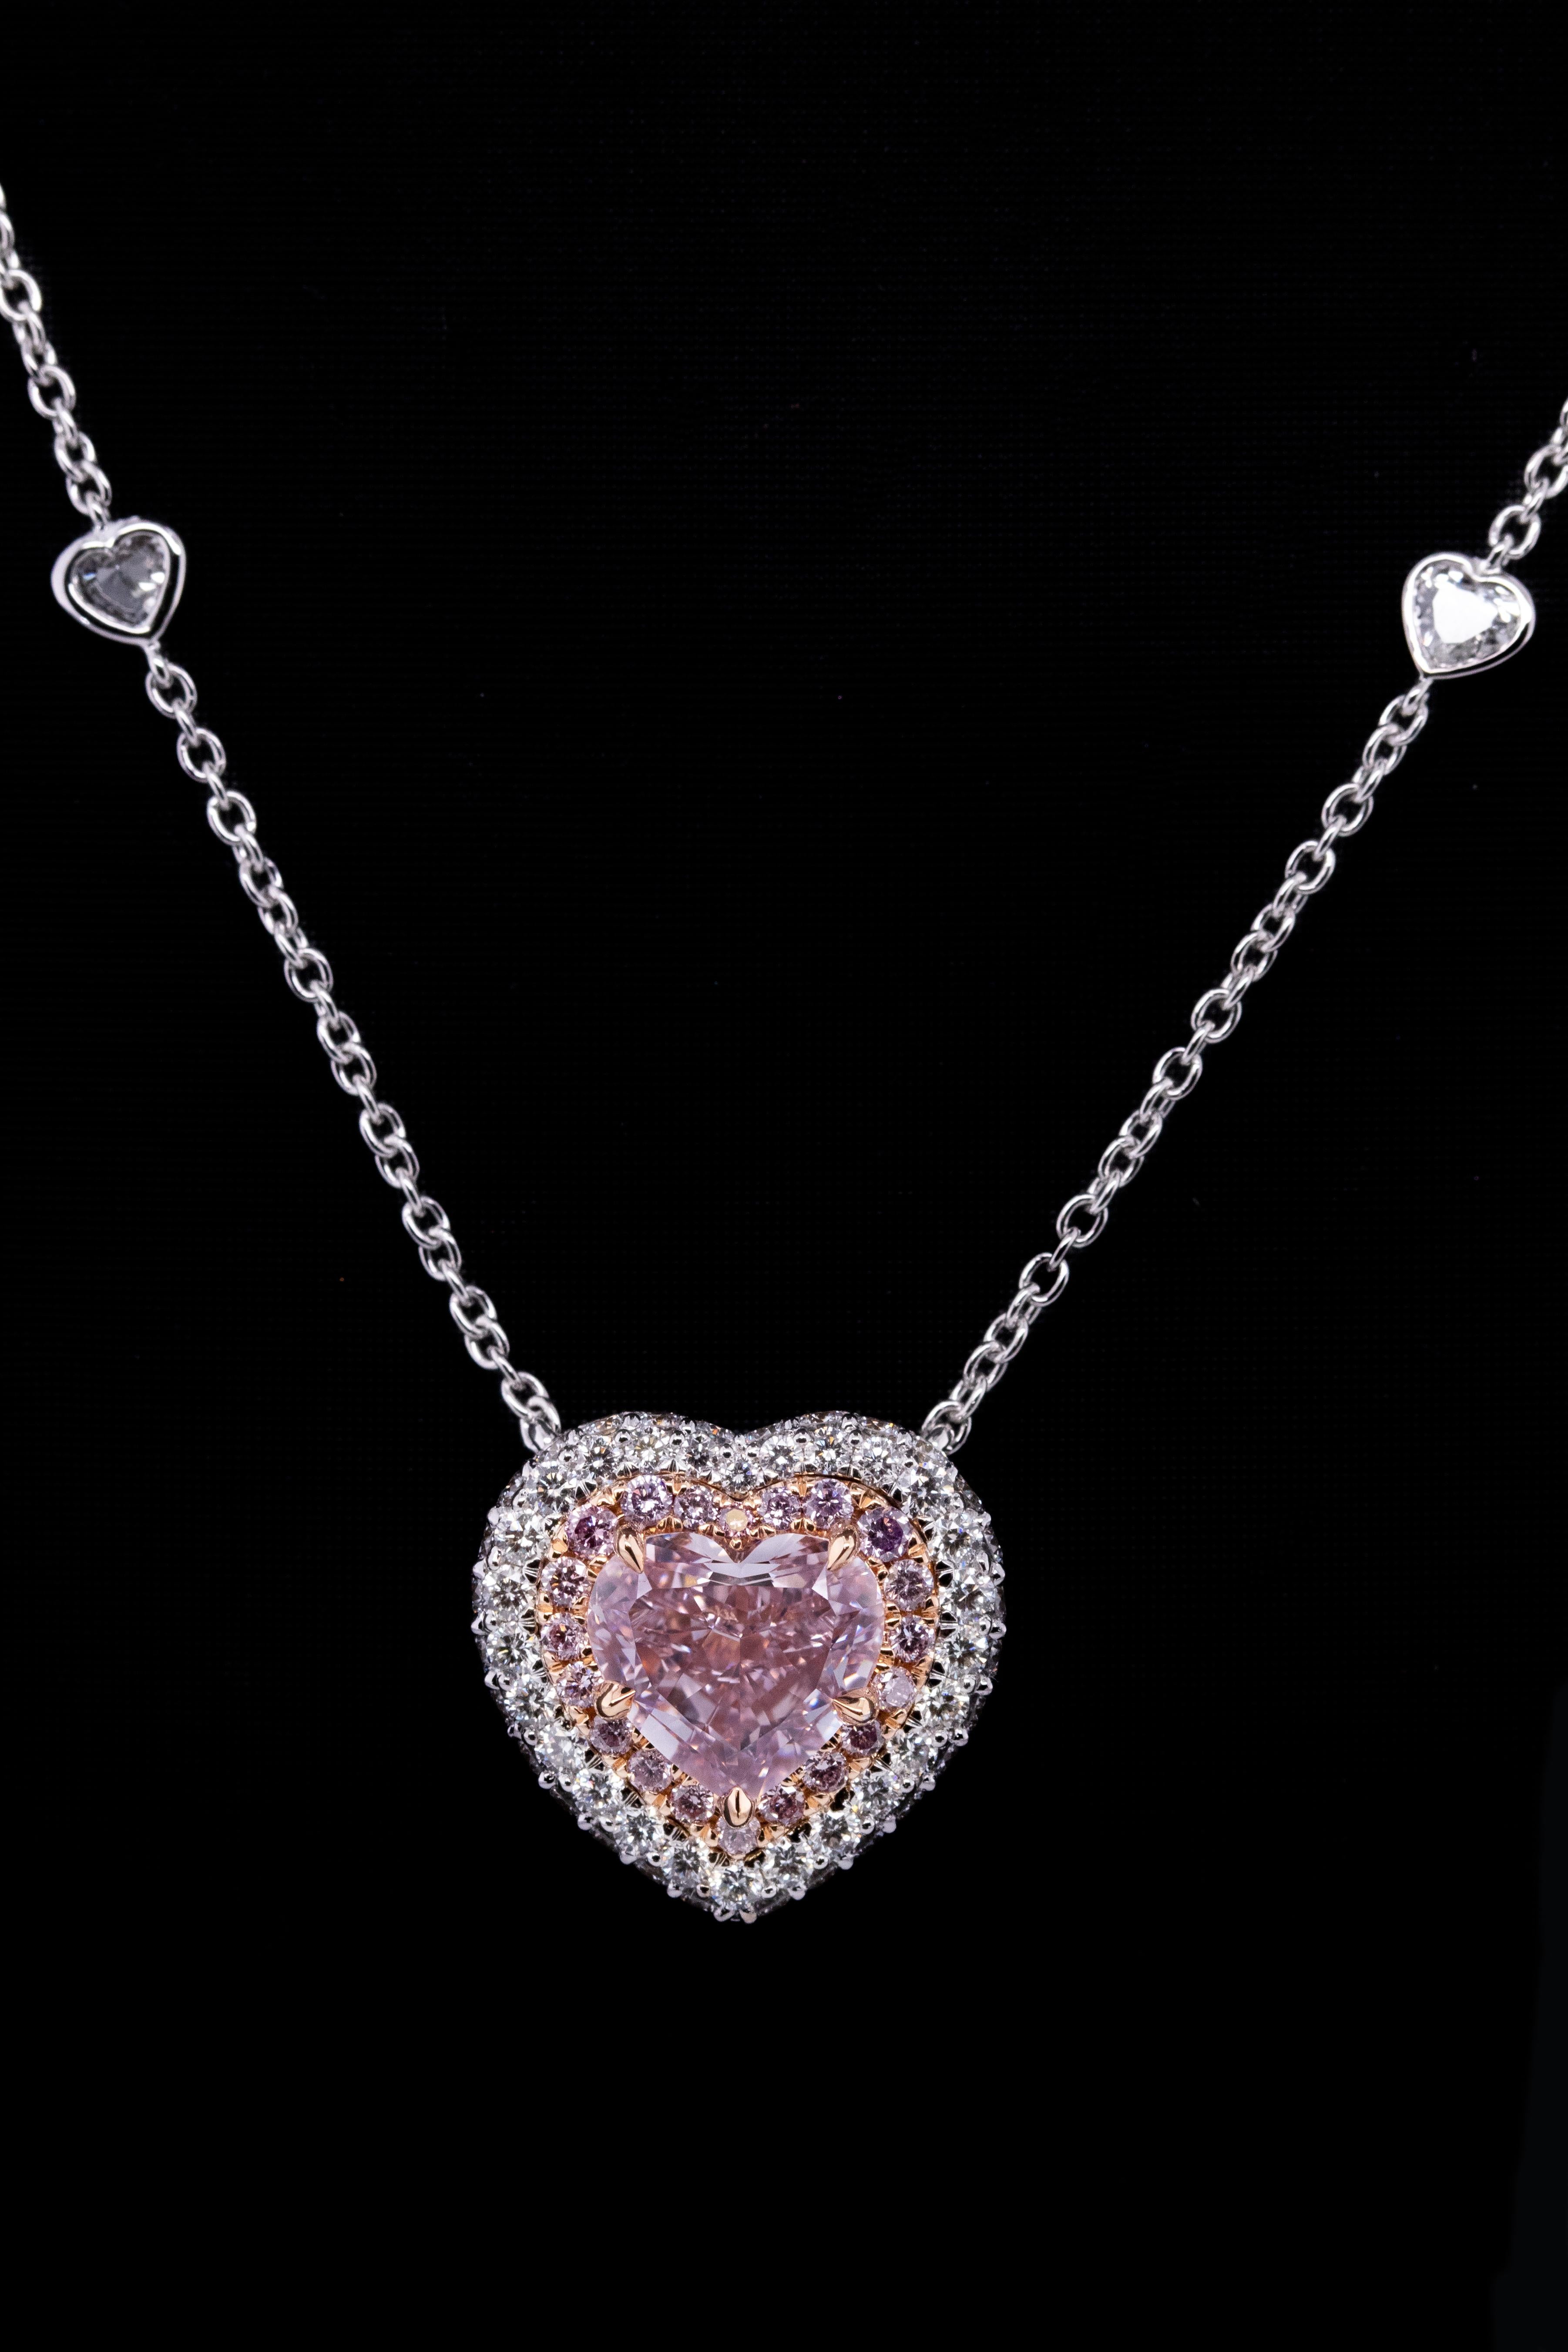 2.16ct Fancy Pink Heart Shape, VS2,

GIA#1206871401,

set in 18KWG with 4 psc HS = 0.47cttw

Plus Pink diamonds melee = 0.209cttw

Plus colorless melee = 0.911 cttw